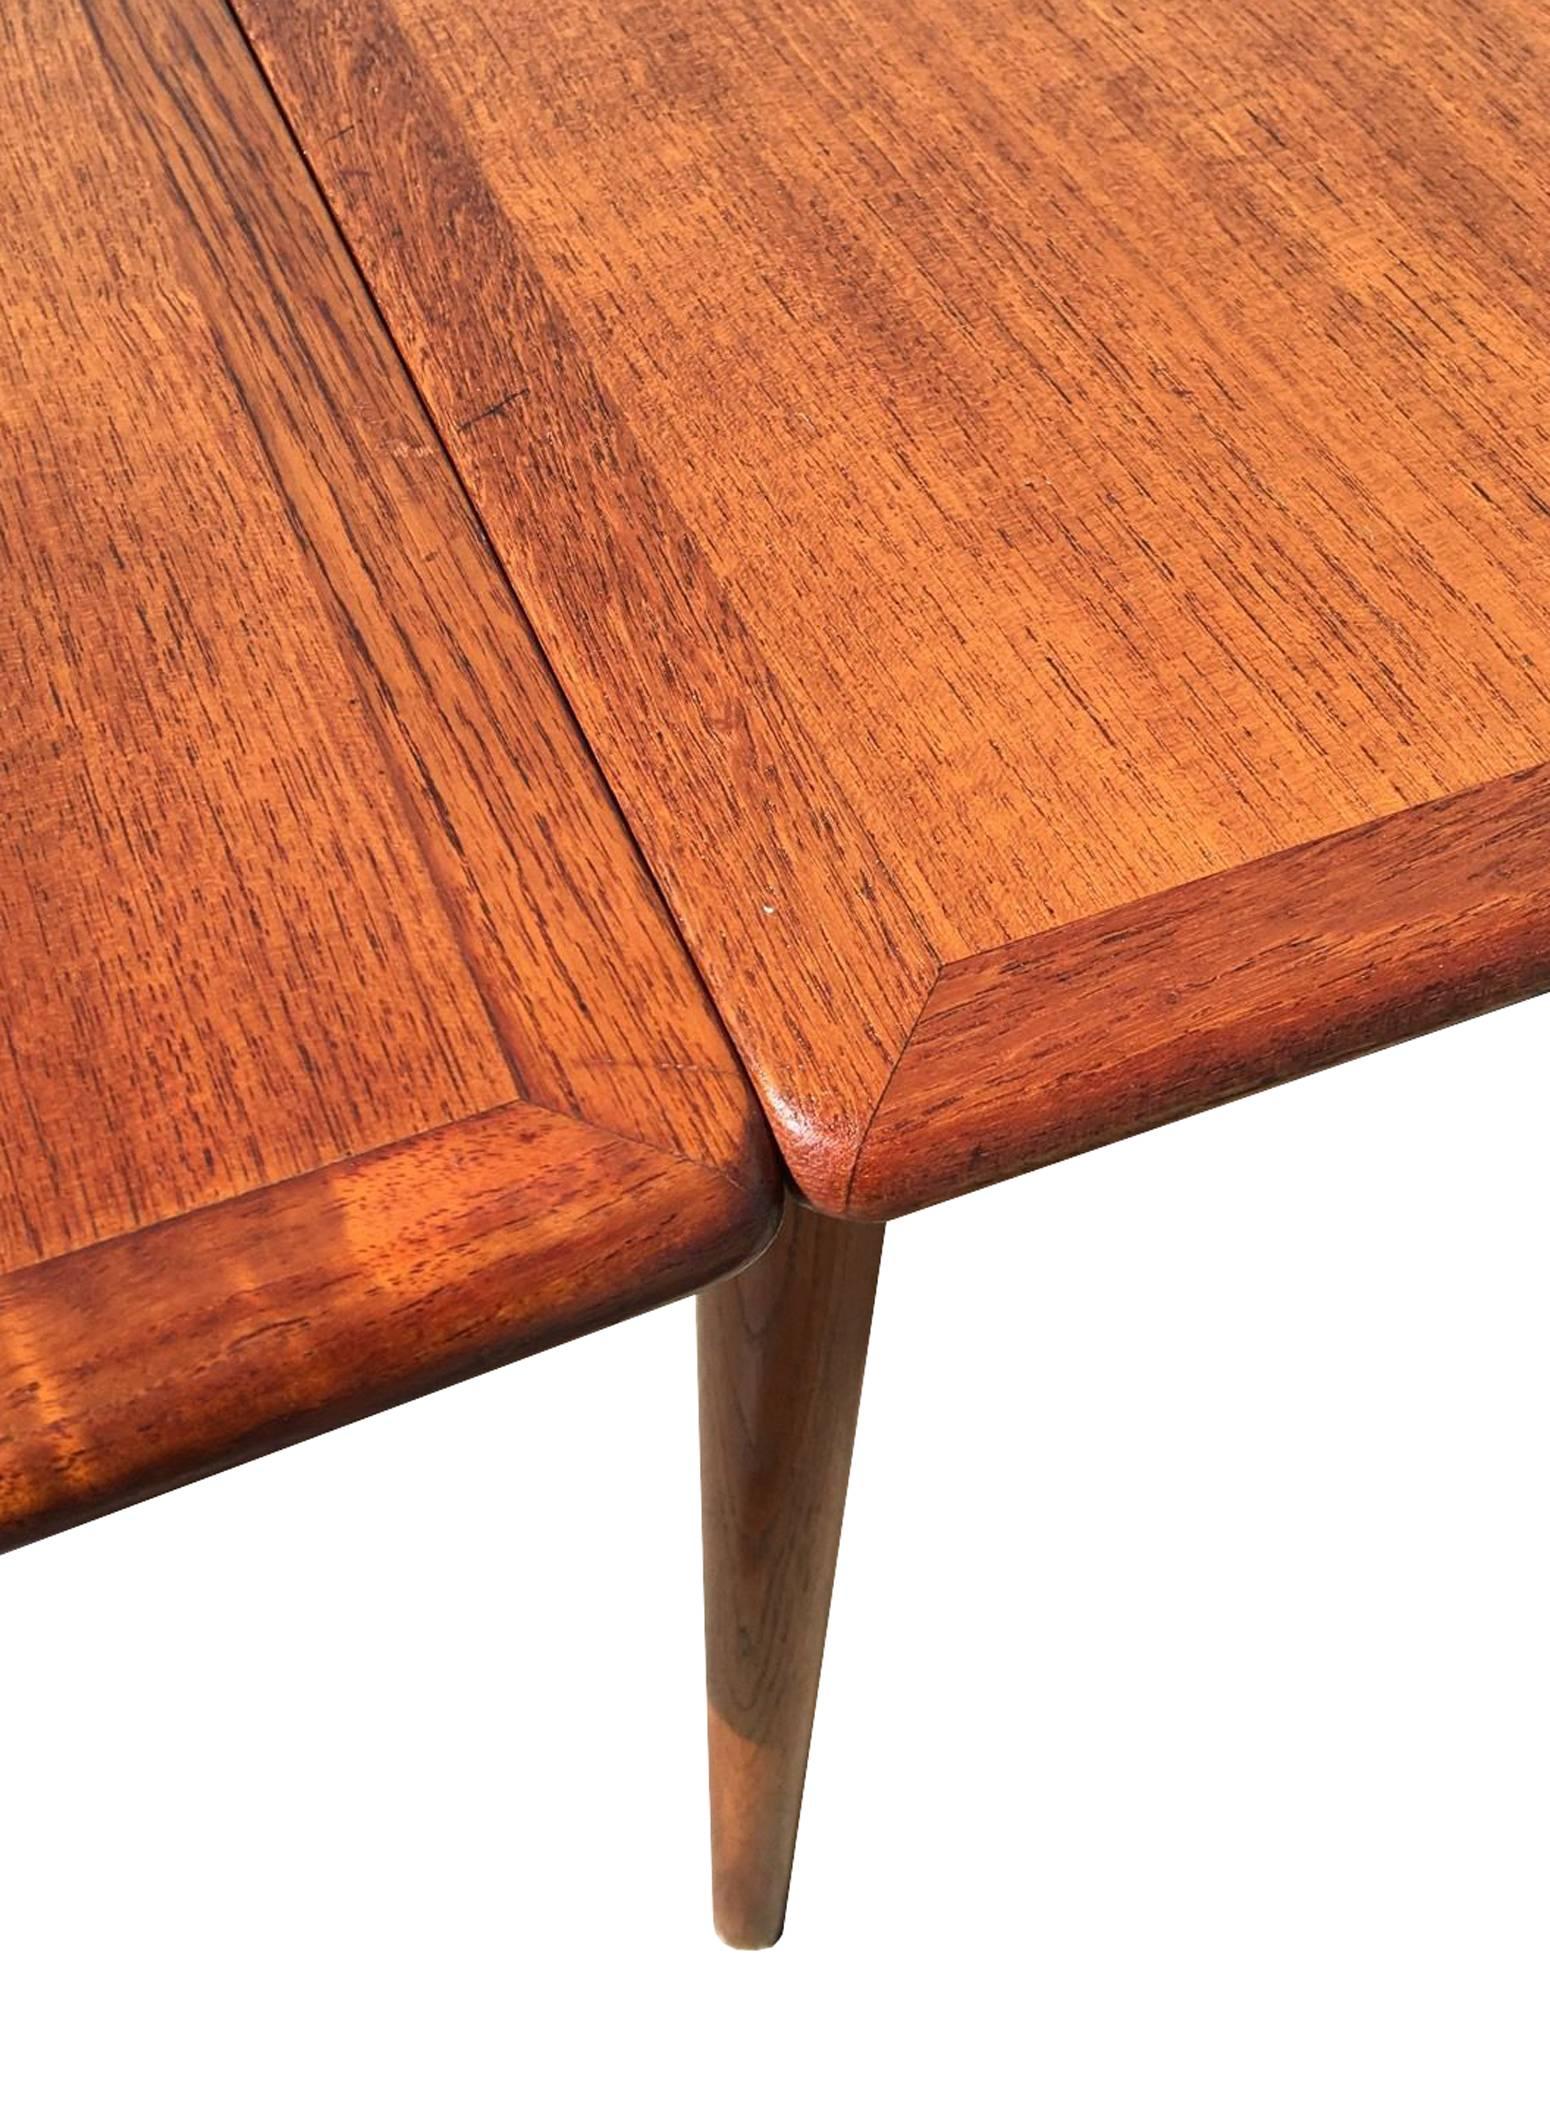 Hans Wegner for Andreas Tuck Teak Dining Table In Good Condition For Sale In New York, NY